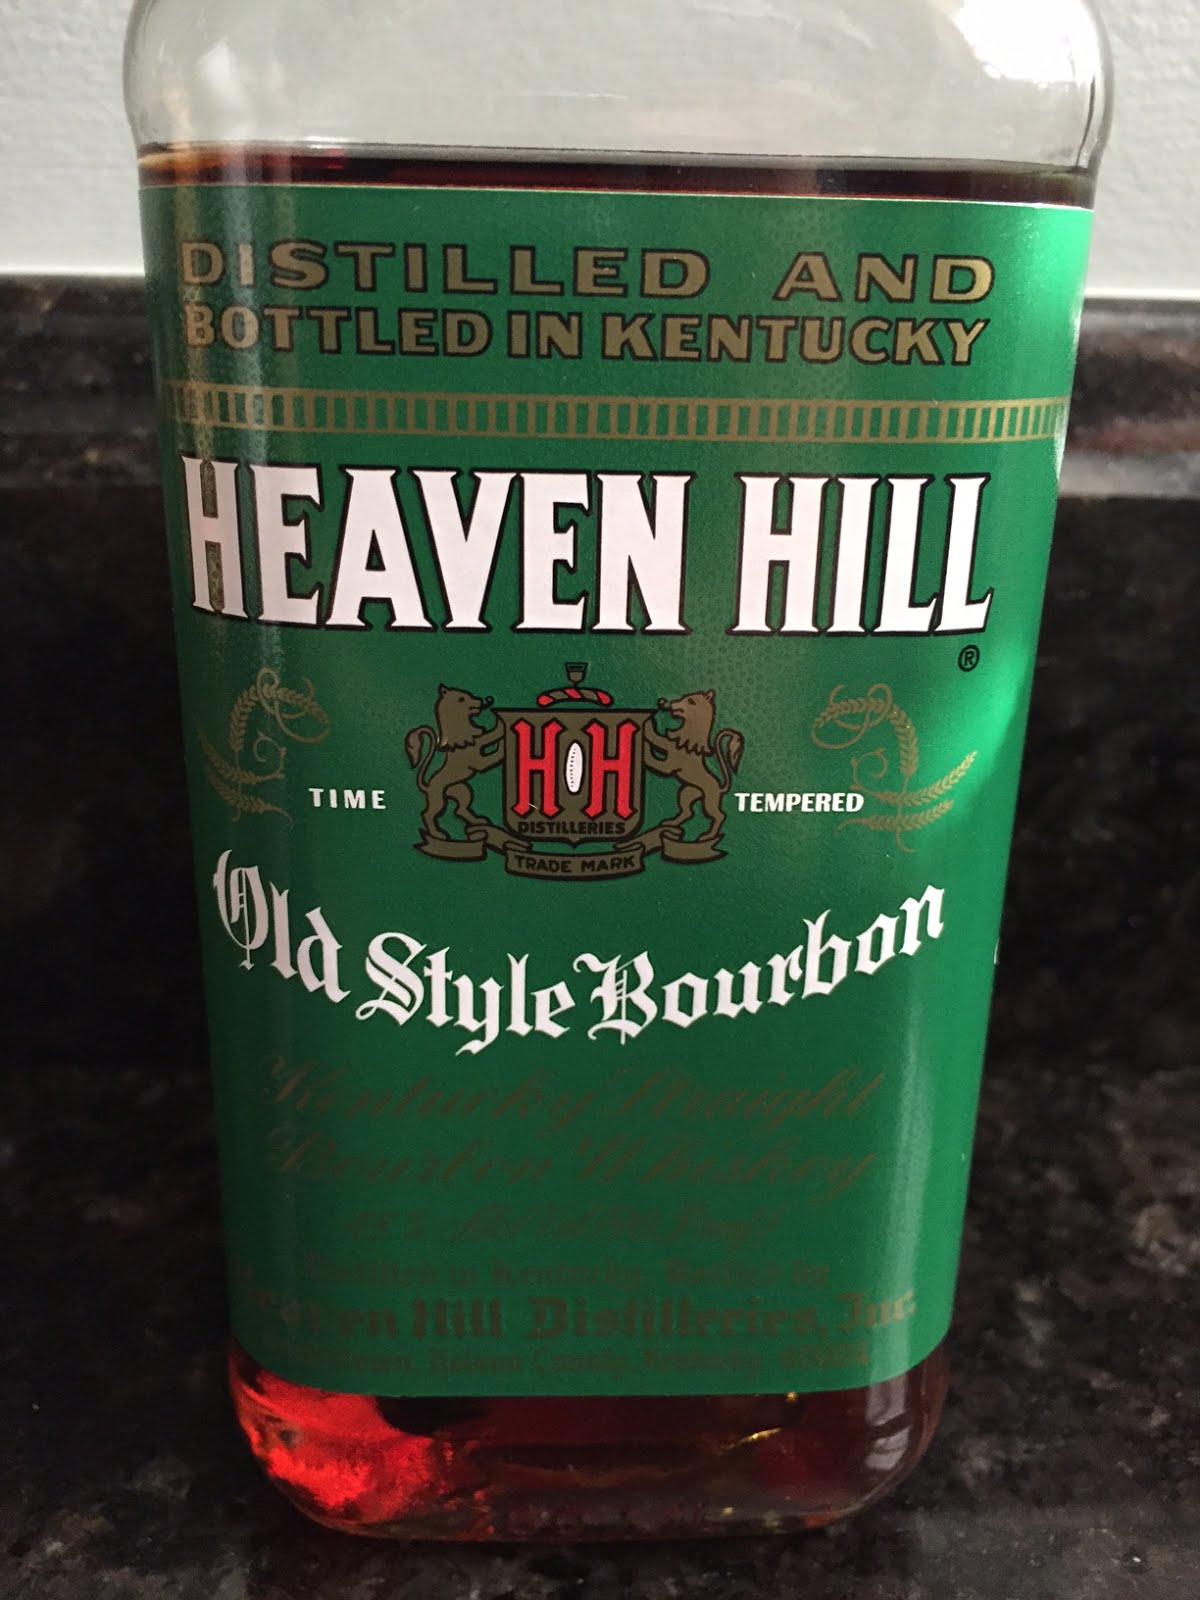 nightcru-review-heaven-hill-old-style-bourbon-green-label-6-years